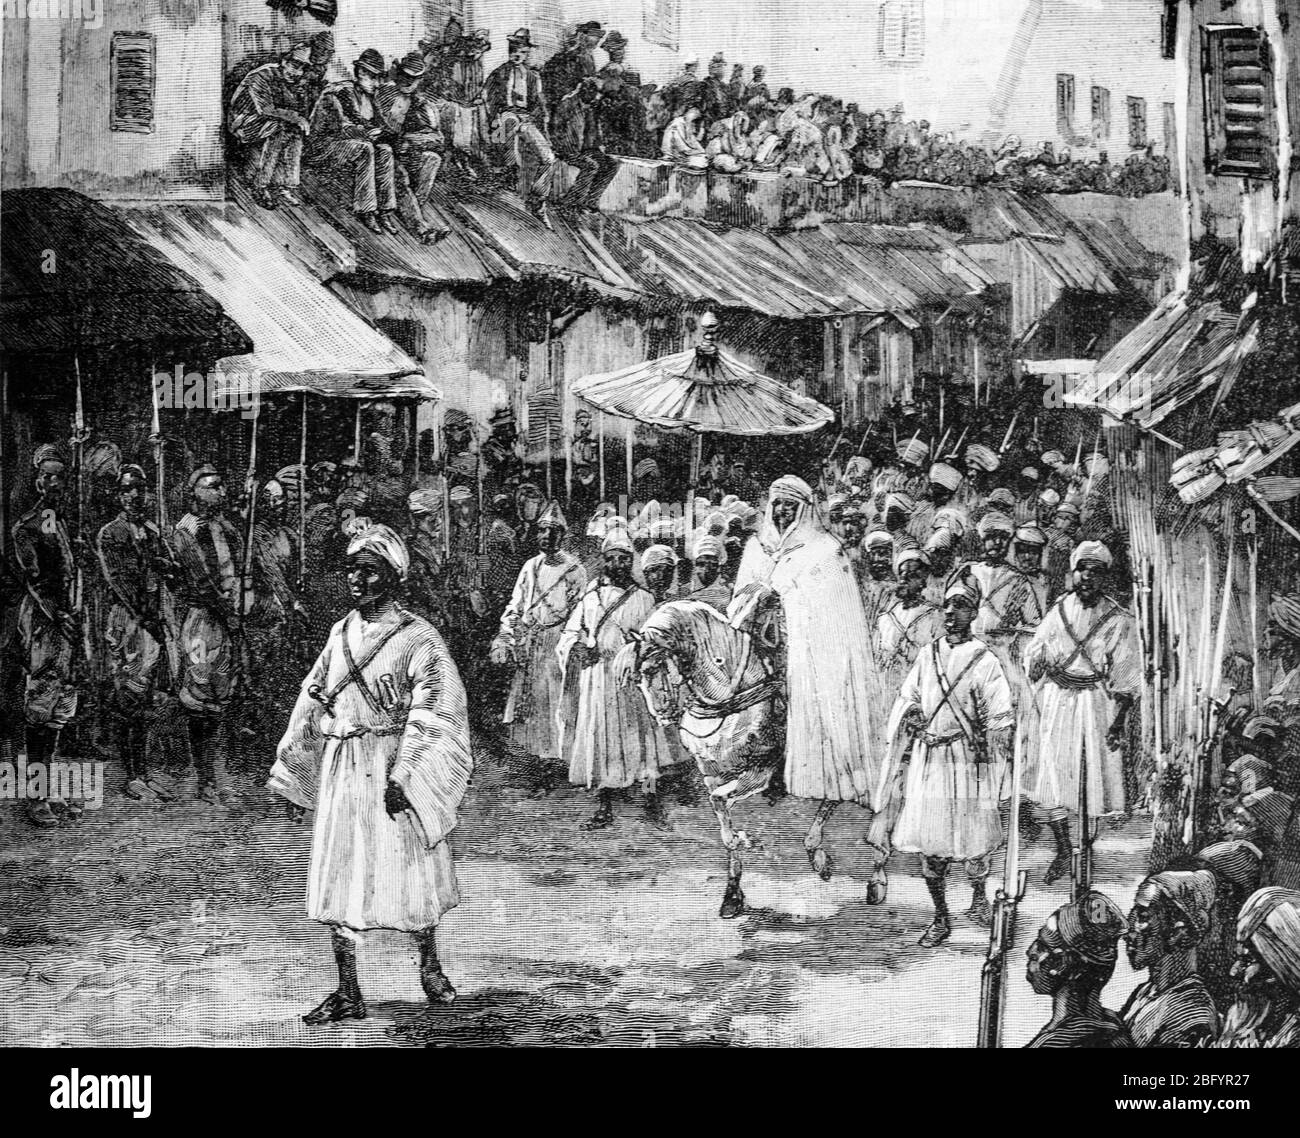 Alaouite Sultan Hassan I of Morocco (1836-1894, reigned 1873-1894) travelling in Procession through the Streets of Tangier Morocco. Vintage or Old Illustration or Engraving 1889 Stock Photo